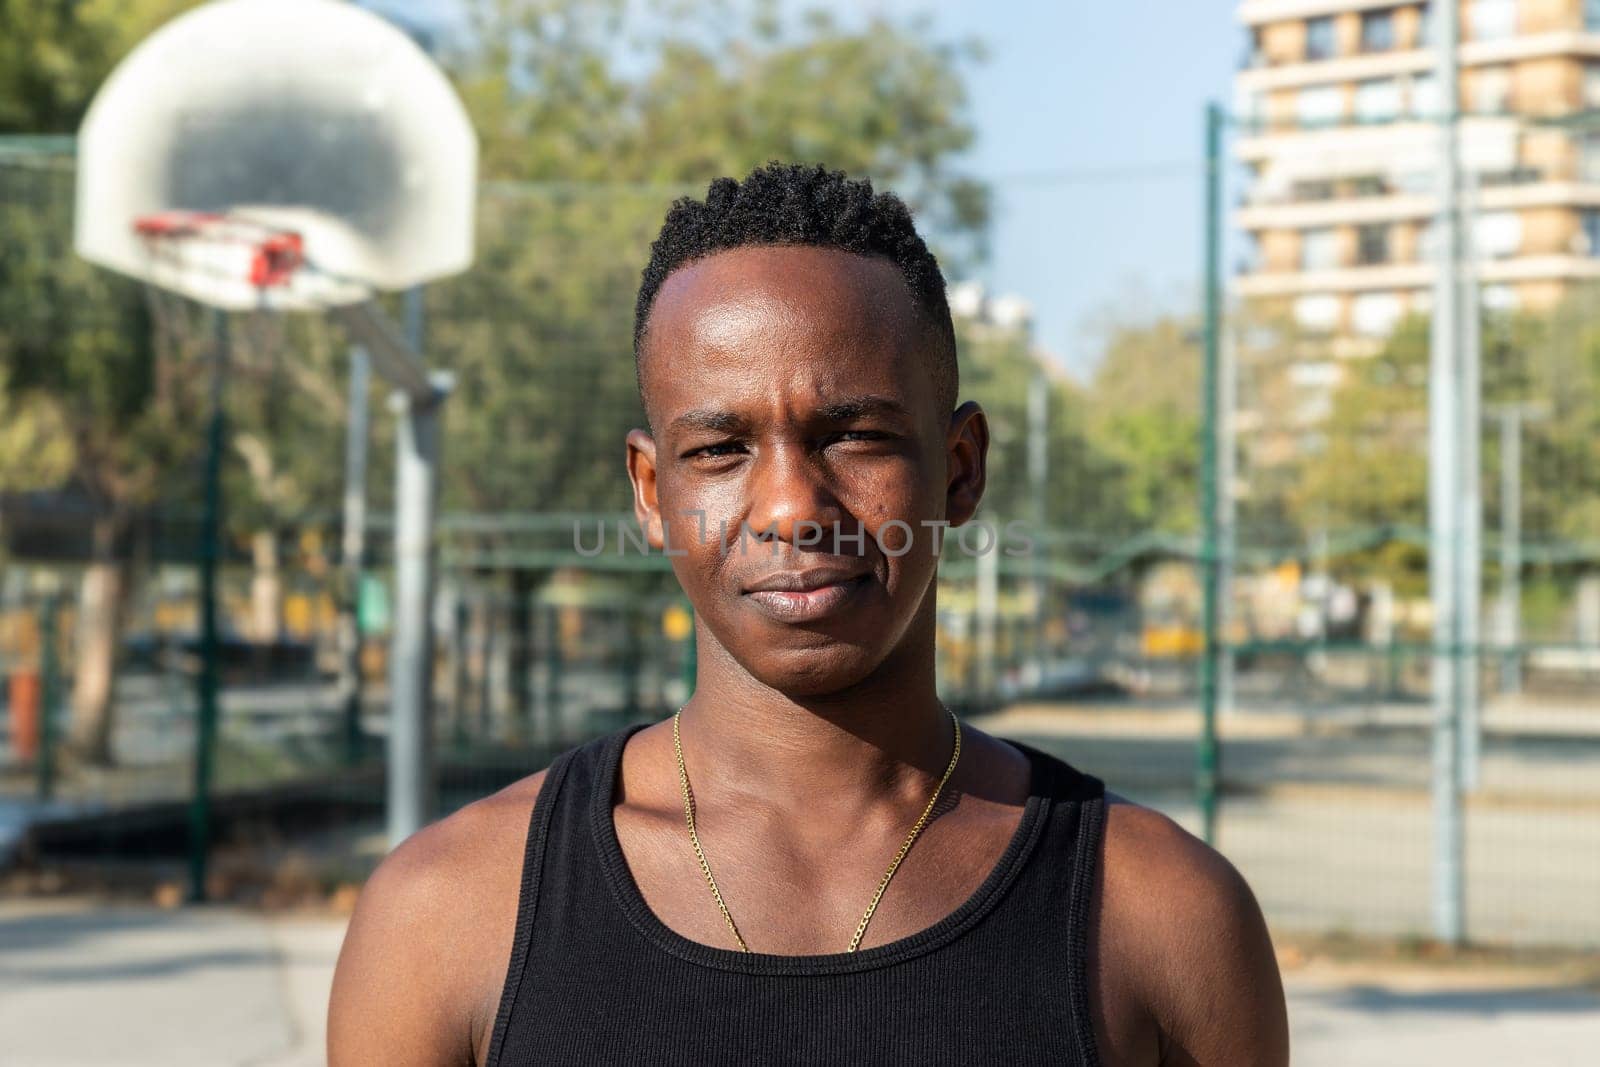 Headshot portrait of black young man in basketball court outdoors looking at camera. Healthy lifestyle and sports concept.